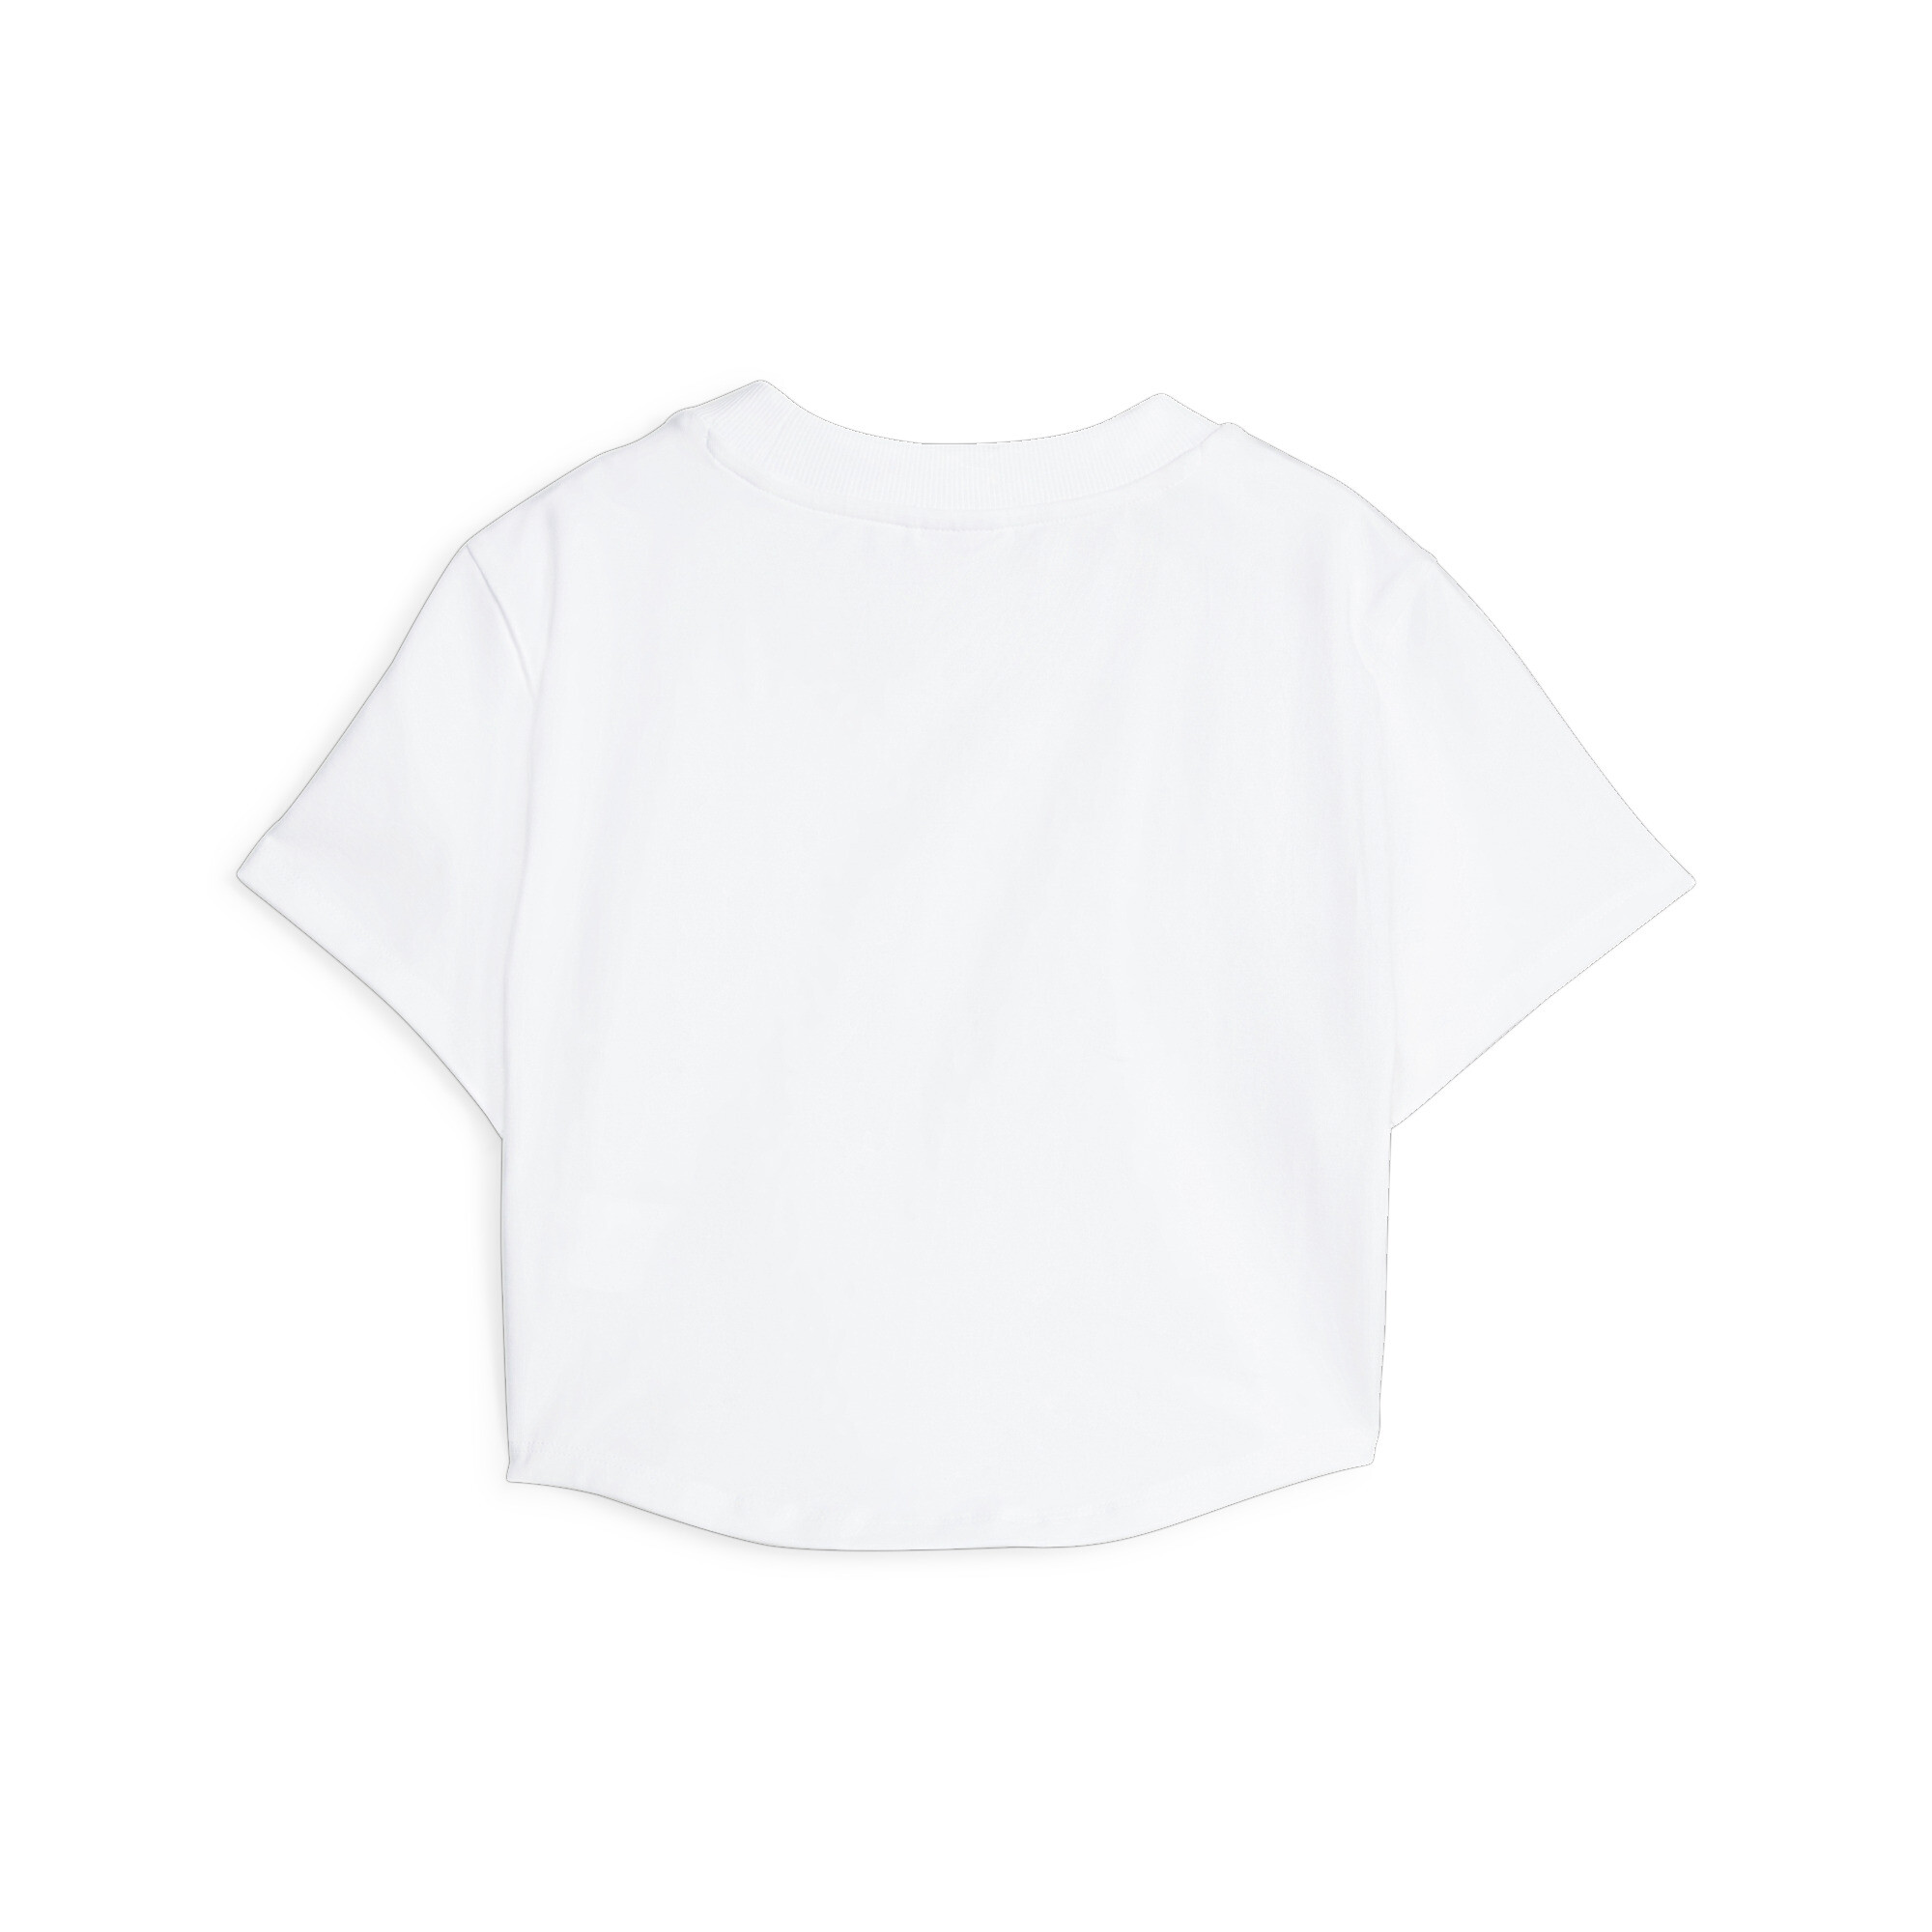 Women's PUMA DARE TO Cropped T-Shirt In White, Size Large